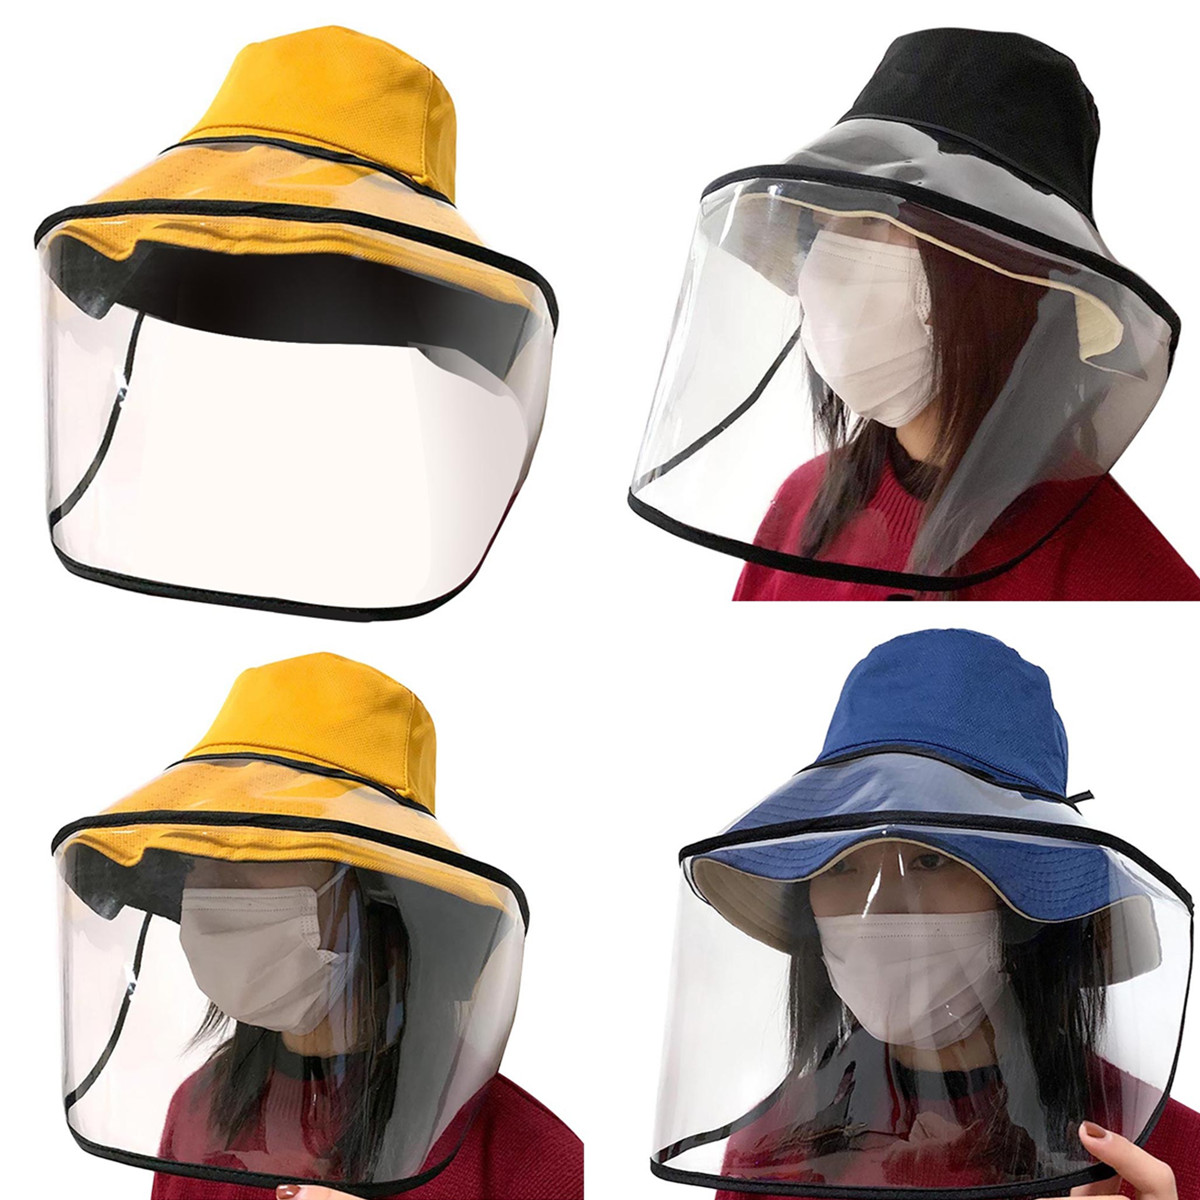 Fisherman-Hat-Clear-Mask-Removable-Protective-Cap-Anti-fog-Full-Face-Outdoor-1657444-1